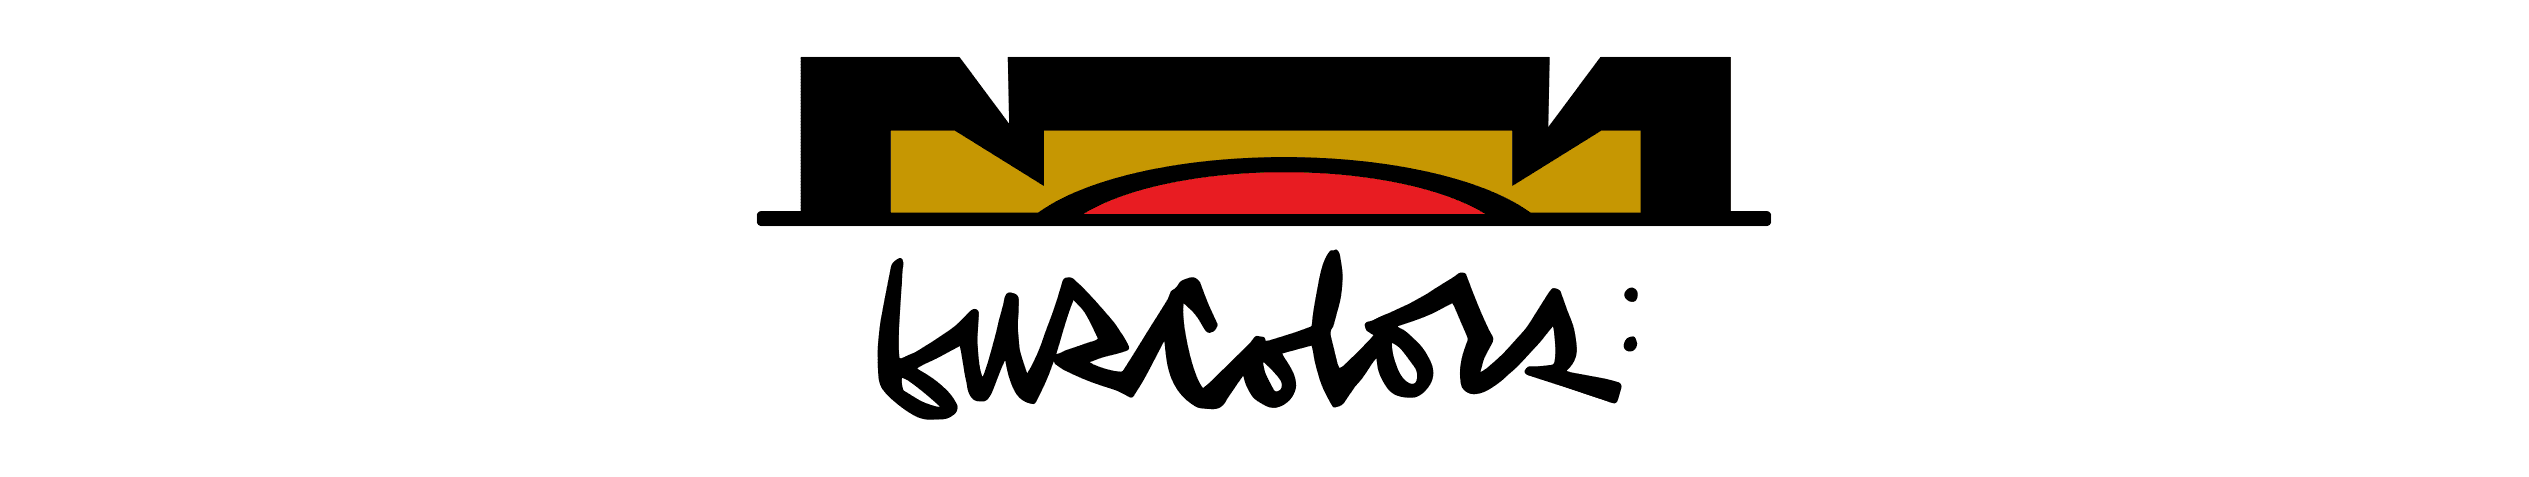 GusColors banner